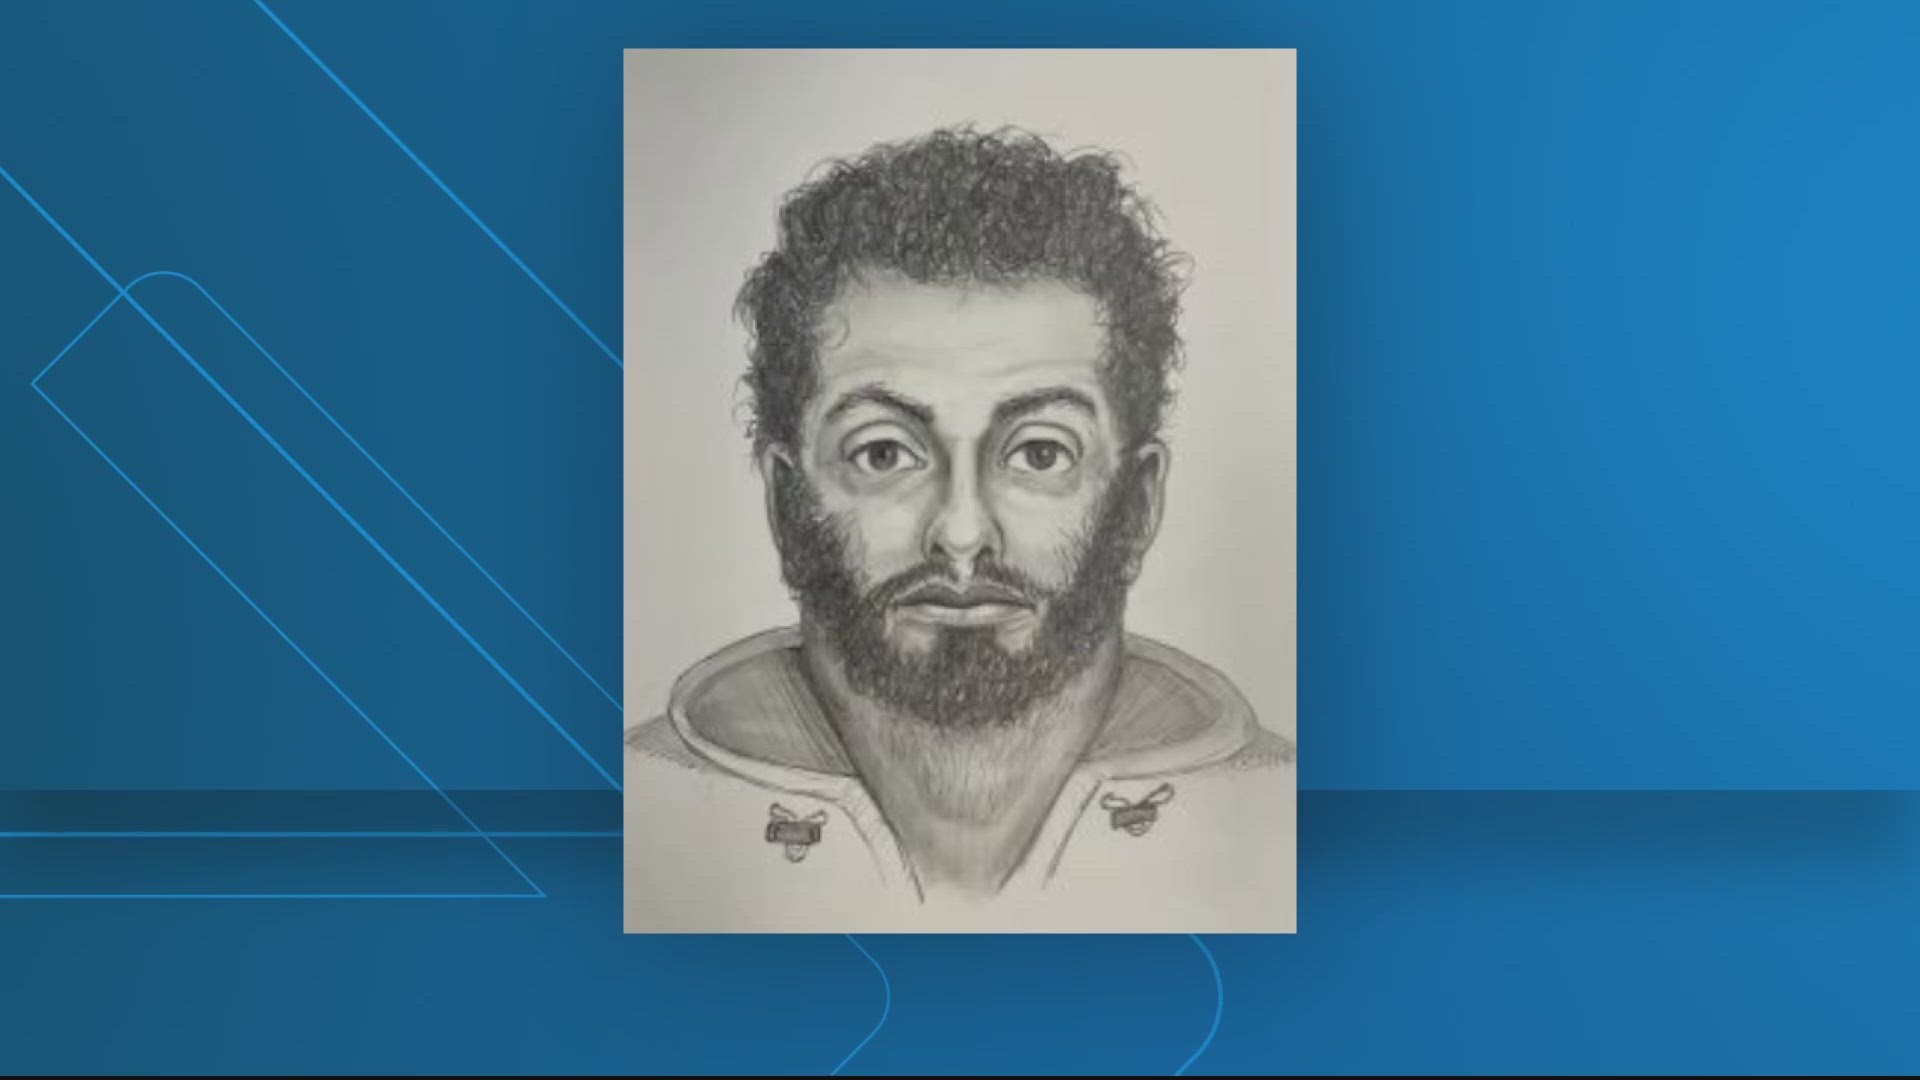 Police are searching for a man accused of sexually assaulting and attempting to rob a woman in Centreville.